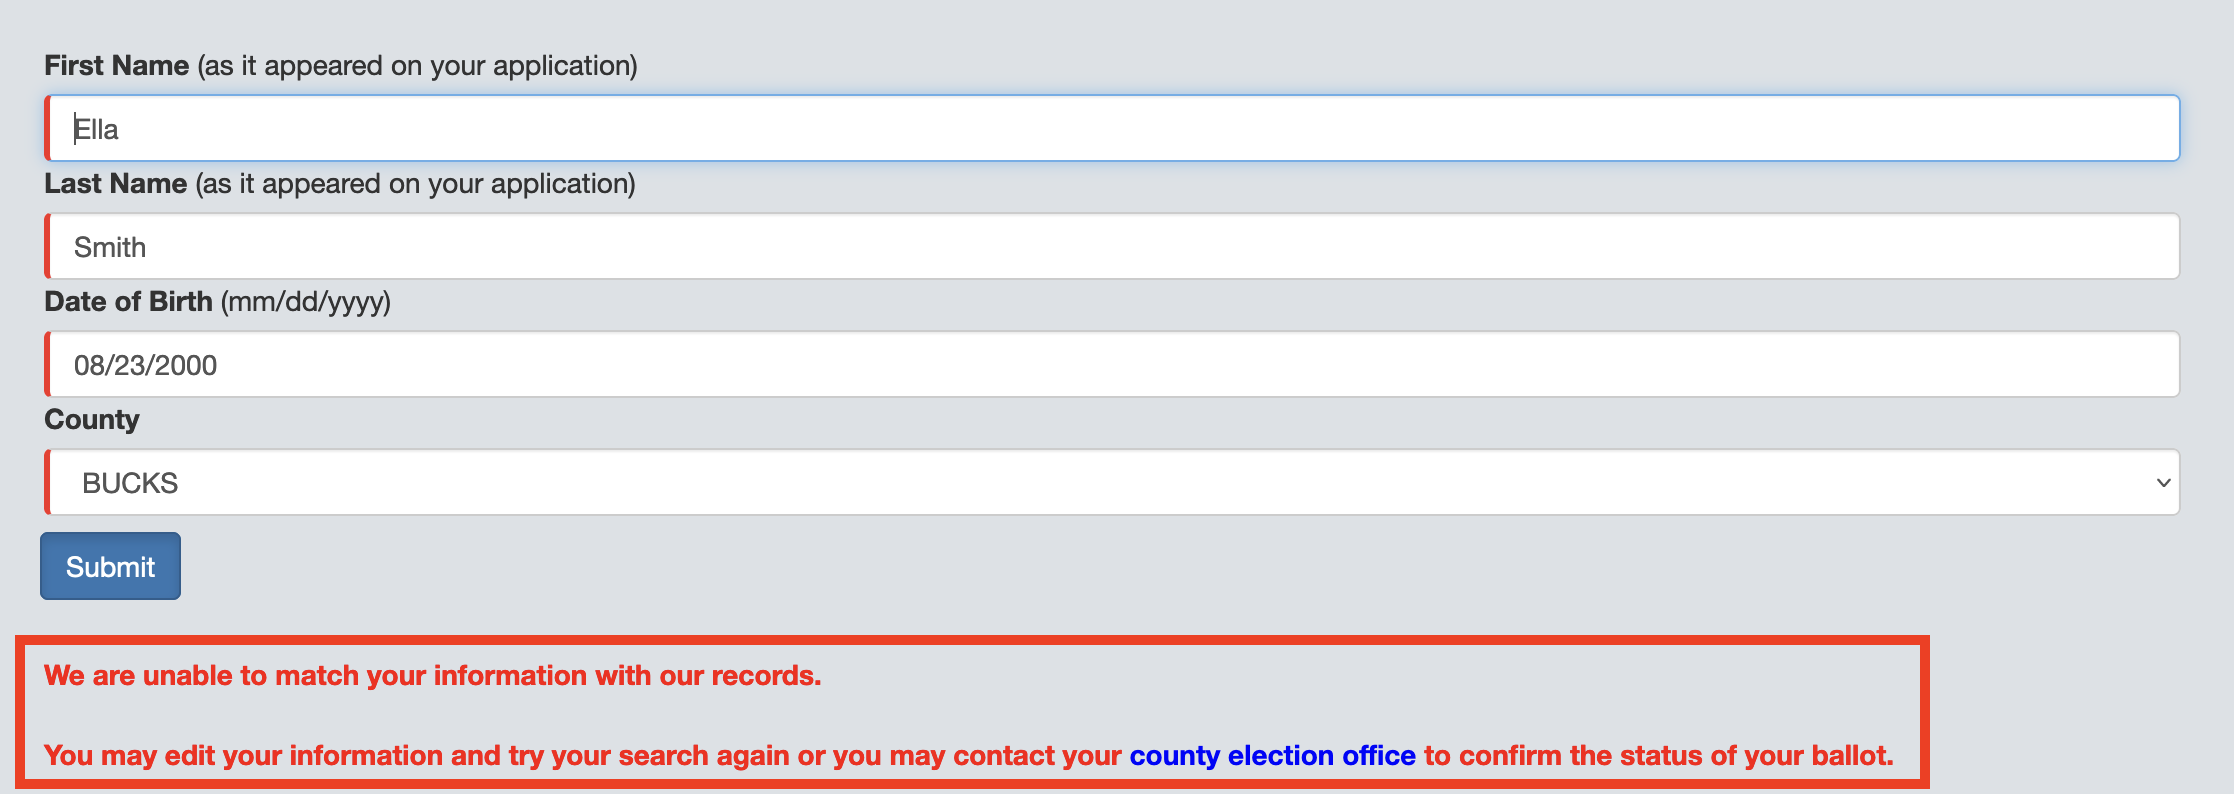 An image of the mail ballot status site at votes.pa.gov. If there is a message in red that says " we are unable to match your information with our records", your application has not been recieved and you should reapply or contact the Board of Elections.